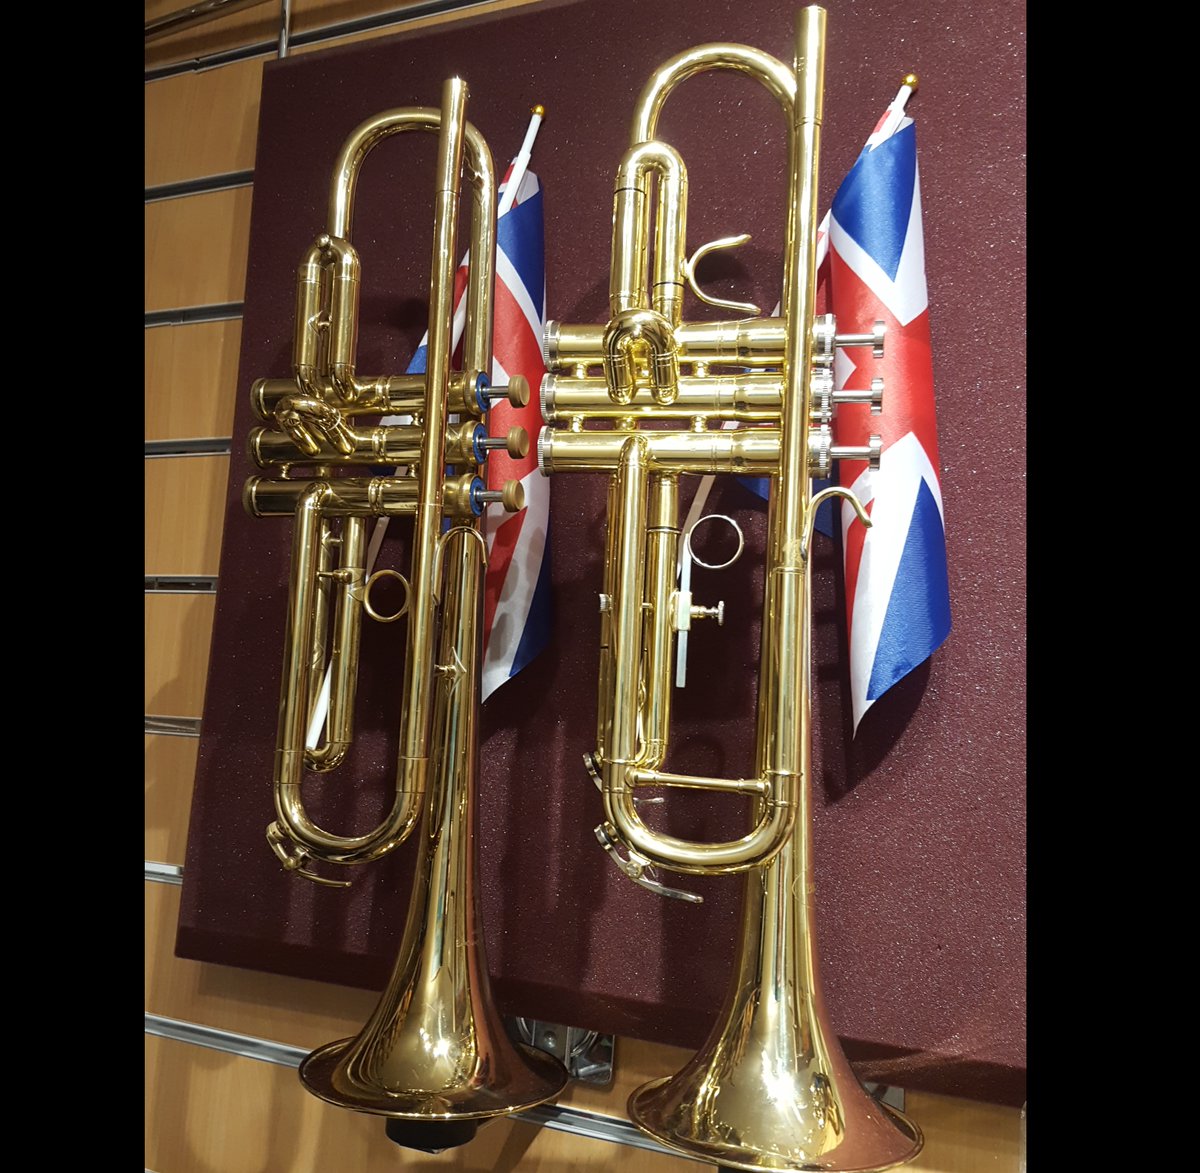 Have a look at this pair of beautiful Besson trumpets. 👀🎺 They are both quality and play brilliantly. Please feel free to call down and see us in the shop to have a closer look or a try. #trumpets #brassinstruments #besson #bessontrumpet #musicshop #music #bolton #est1832